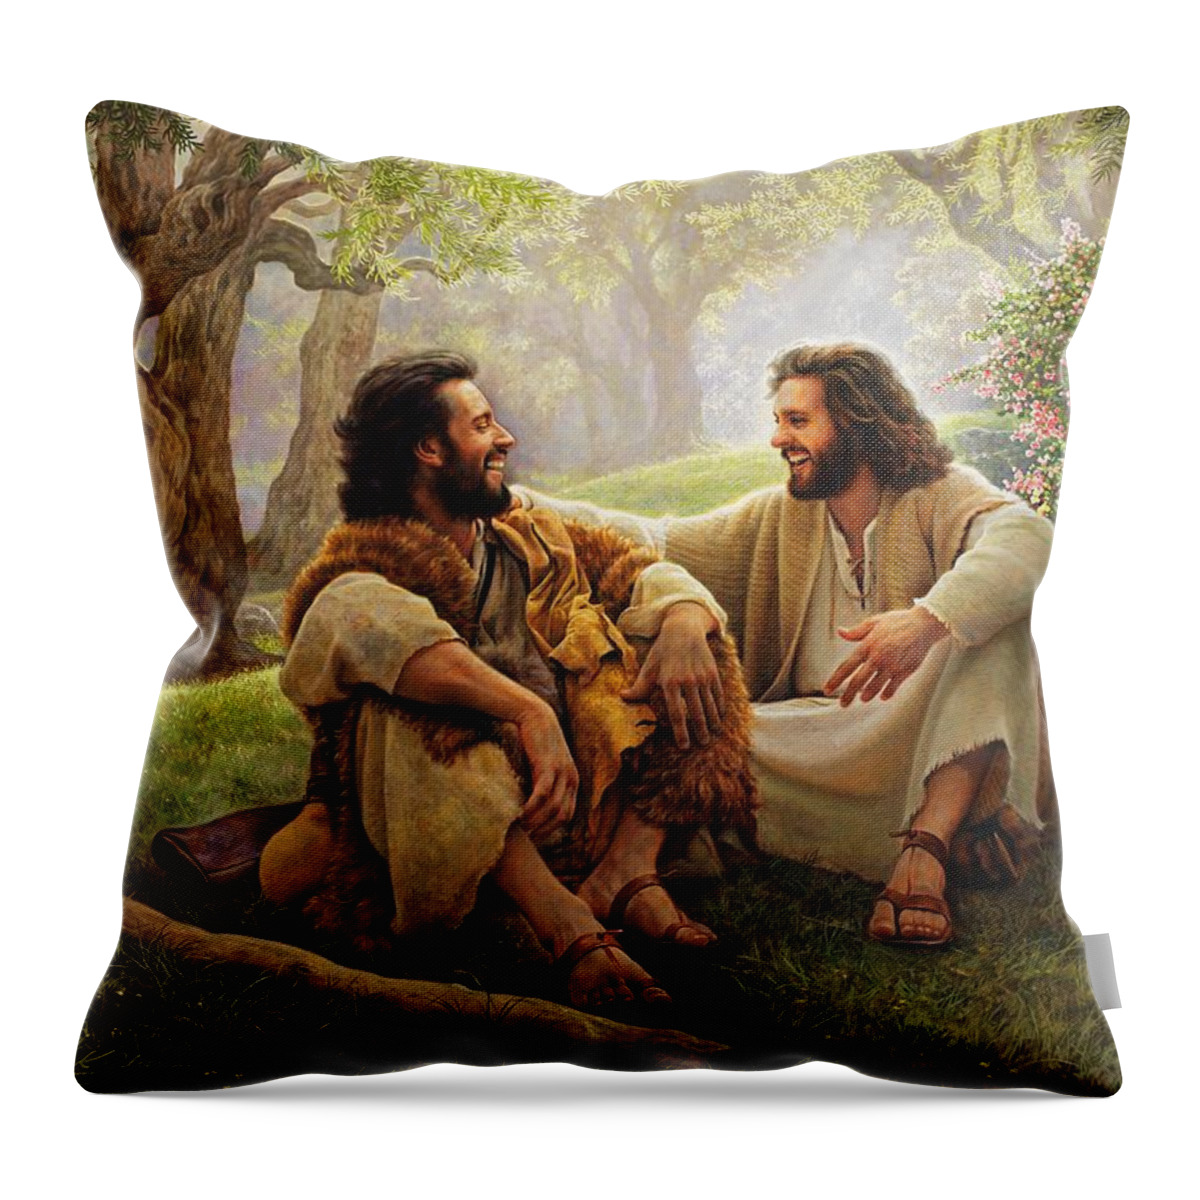 Jesus Throw Pillow featuring the painting The Way of Joy by Greg Olsen